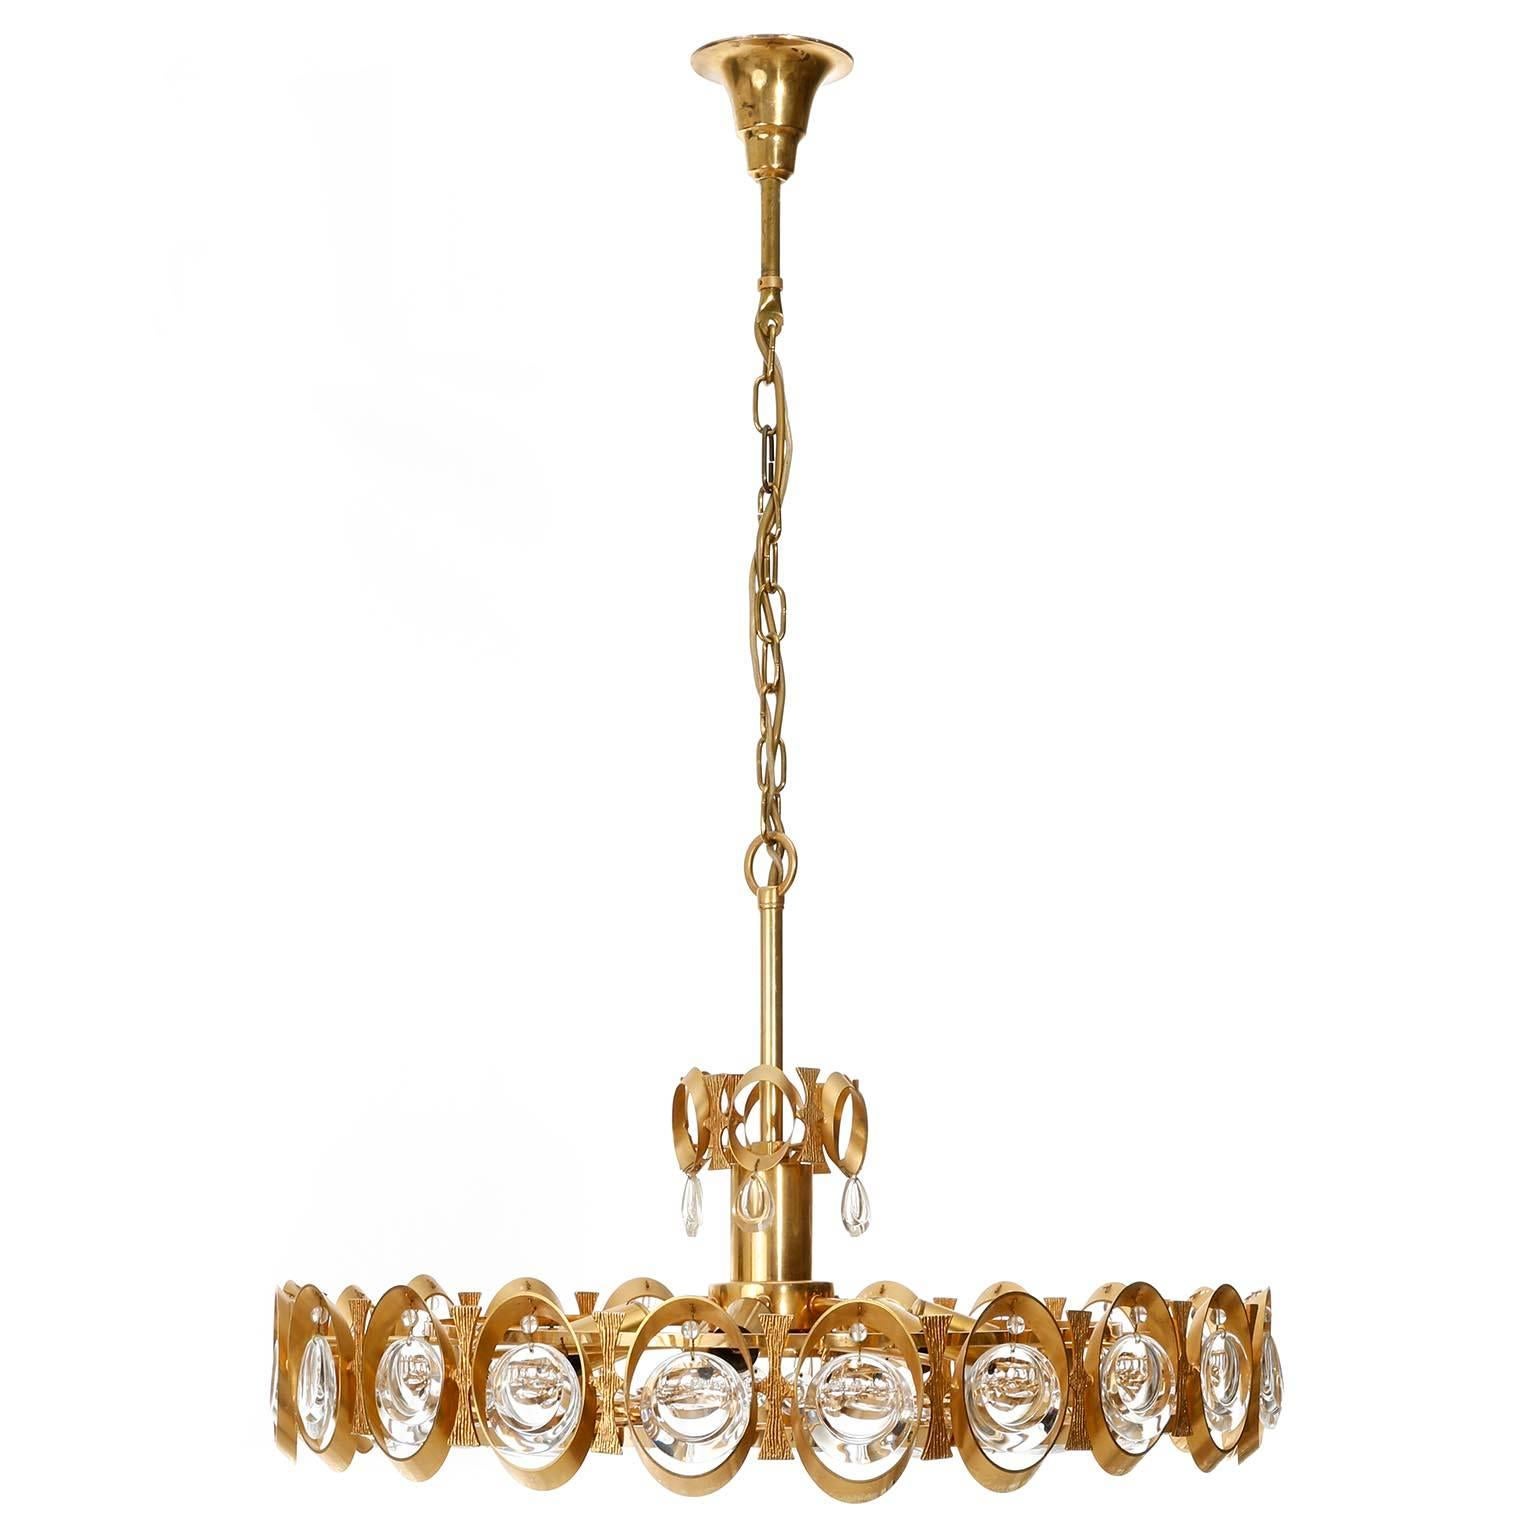 A stunning 24-karat gold-plated brass Hollywood Regency chandelier or pendant light by Palwa (Palme & Walter), Germany, manufactured in midcentury, circa 1970 (end of 1960s or early 1970s).
This wonderful fixture is made of a gilded brass frame